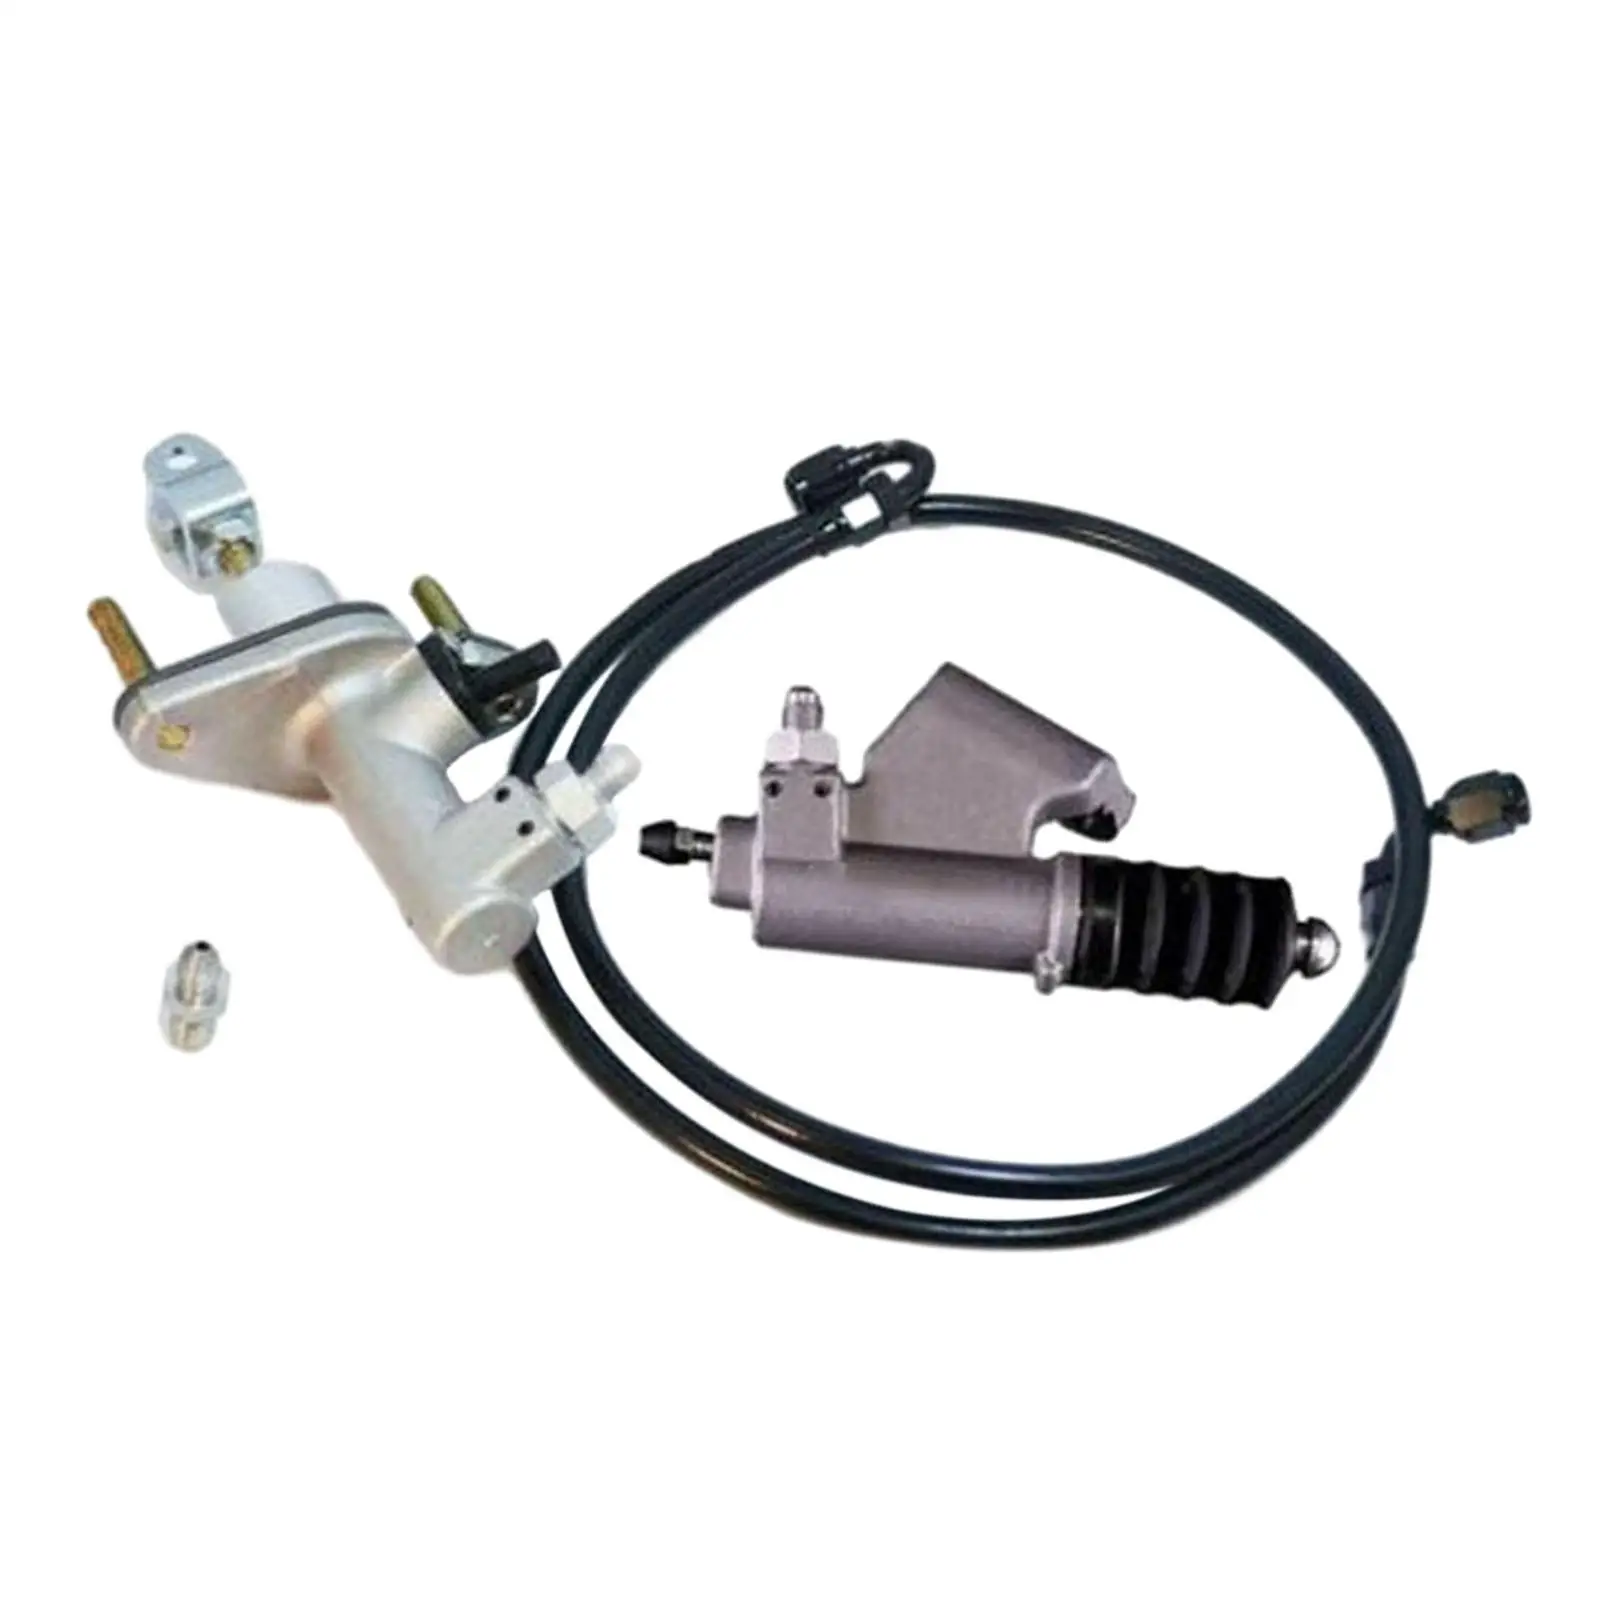 Ktd-clk-kms Clutch Master Slave Cylinder Assembly for Acura Easily Install Assembly Direct Replacement Vehicle Spare Parts